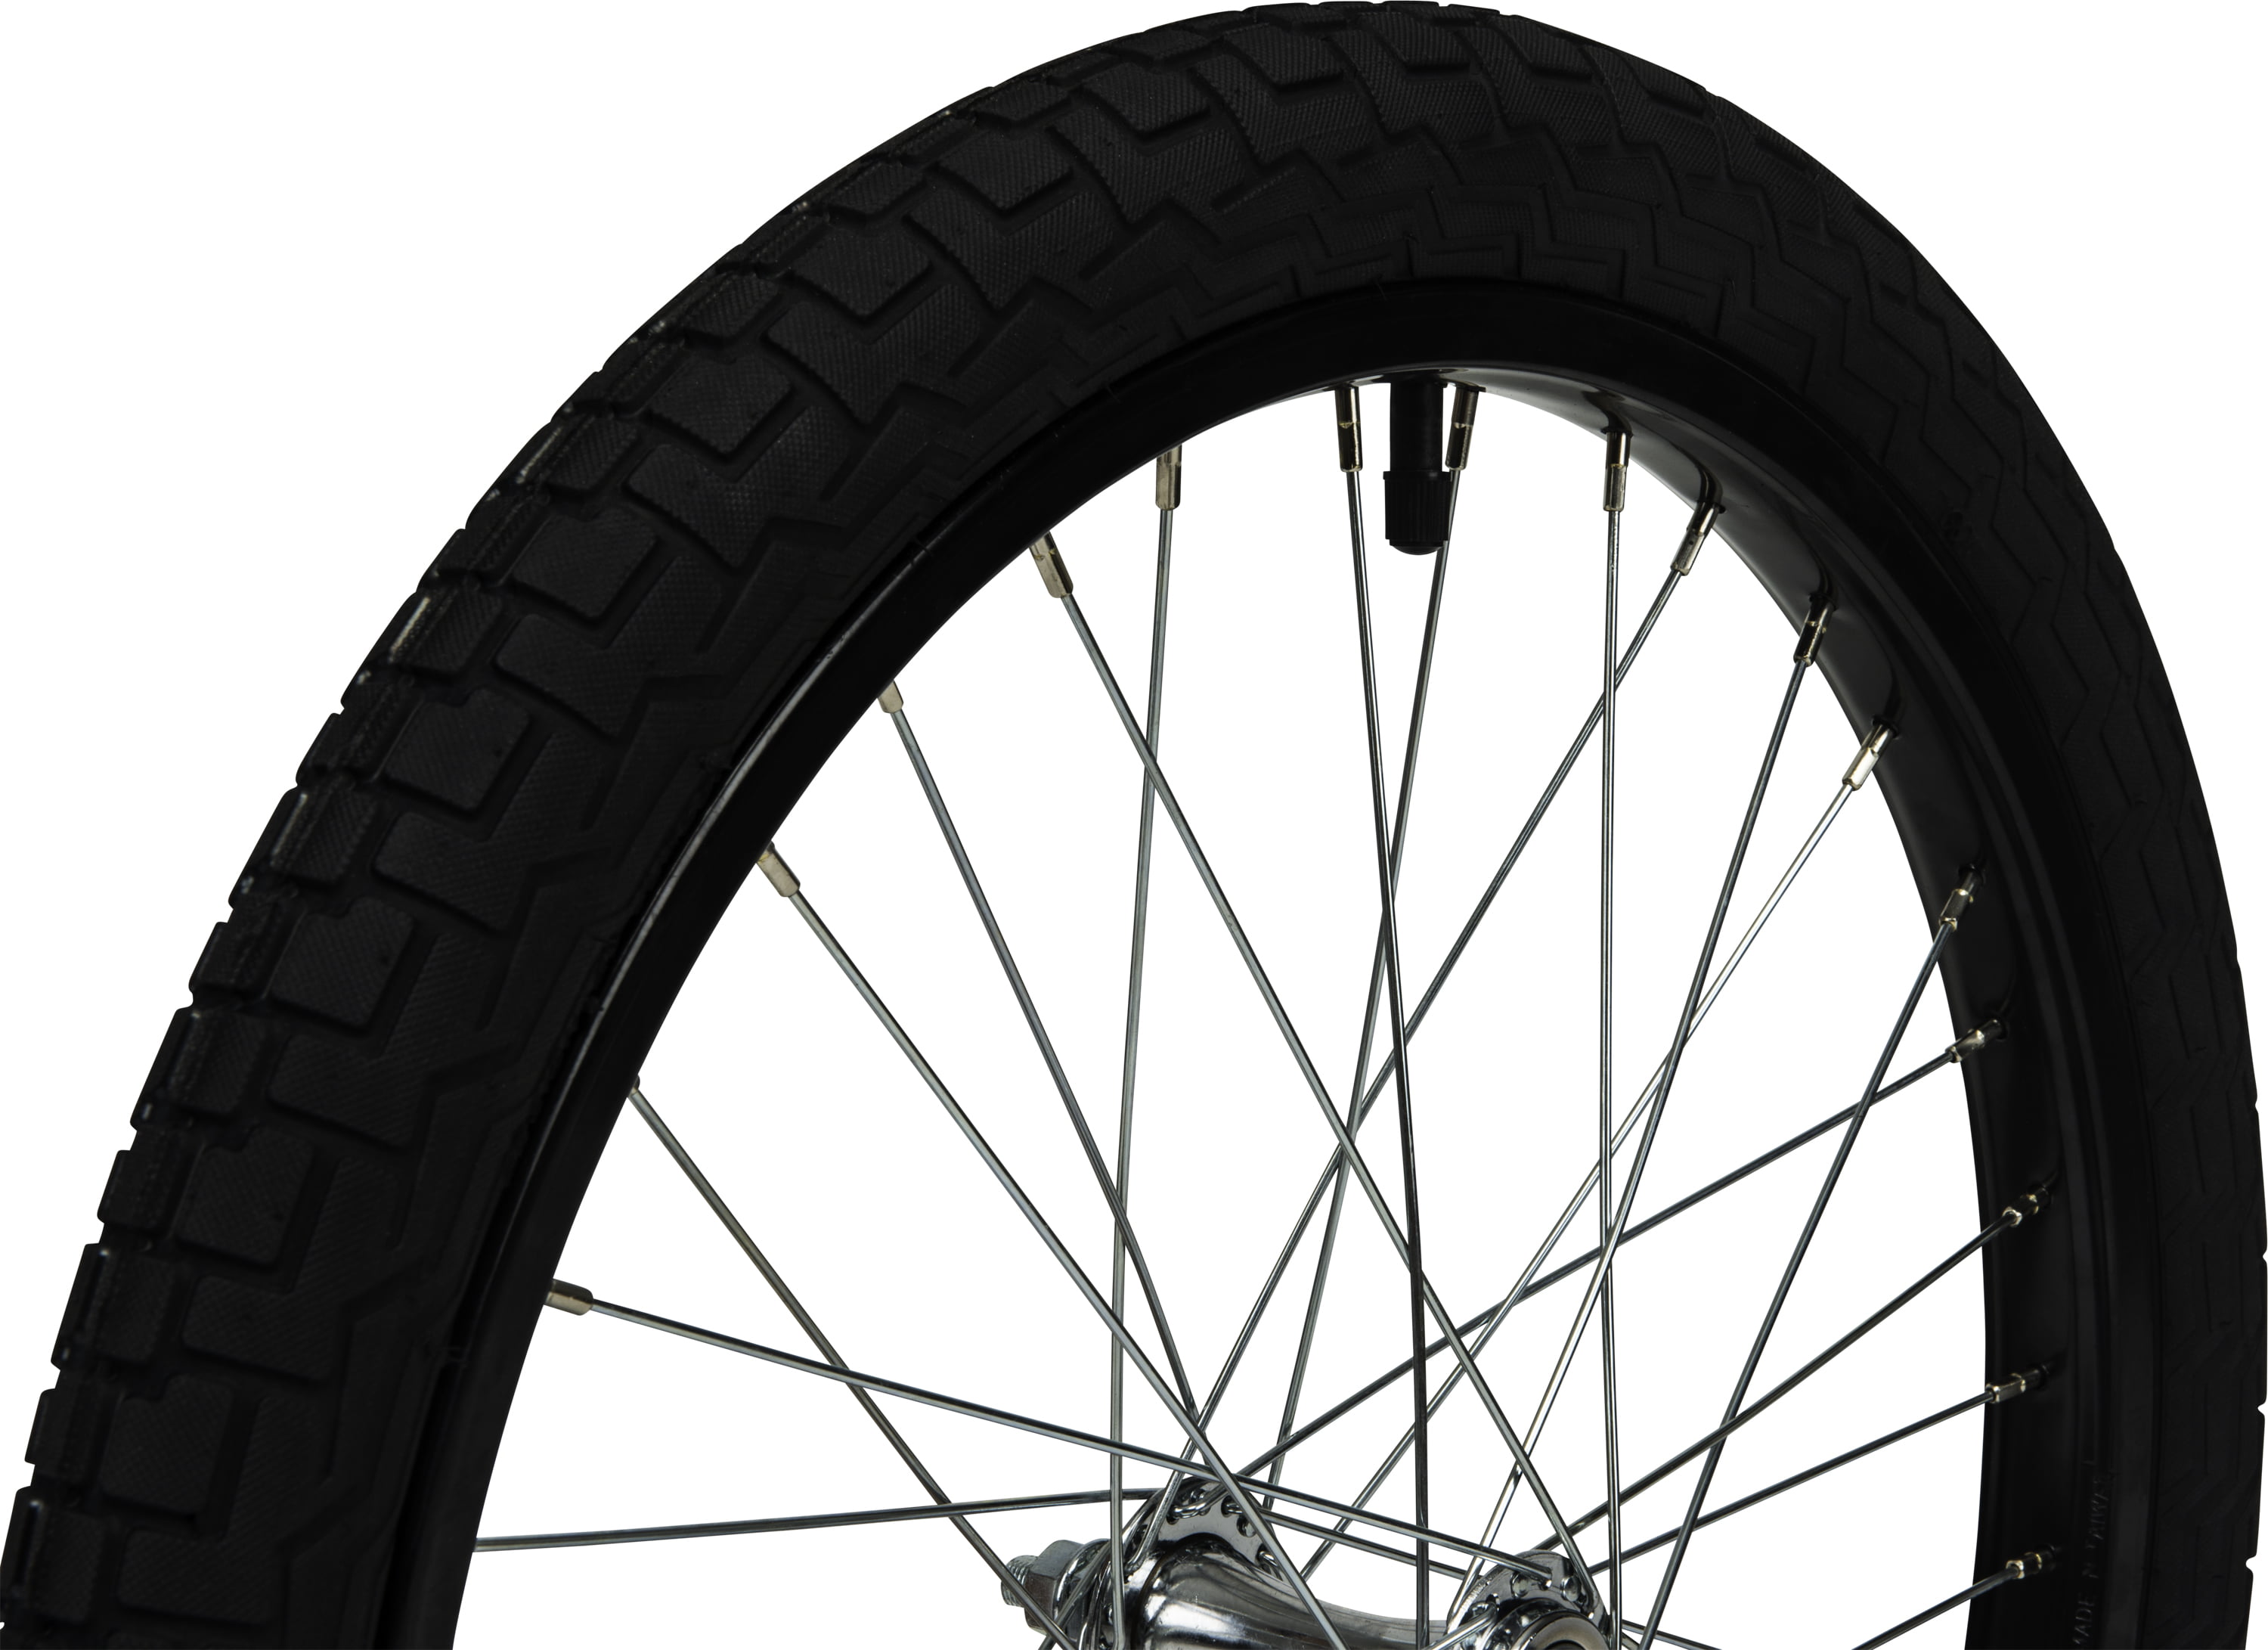 20 In Black 7115510 for sale online Bell Air Guard Freestyle BMX Bike Tire x 1.75-2.25 In. 